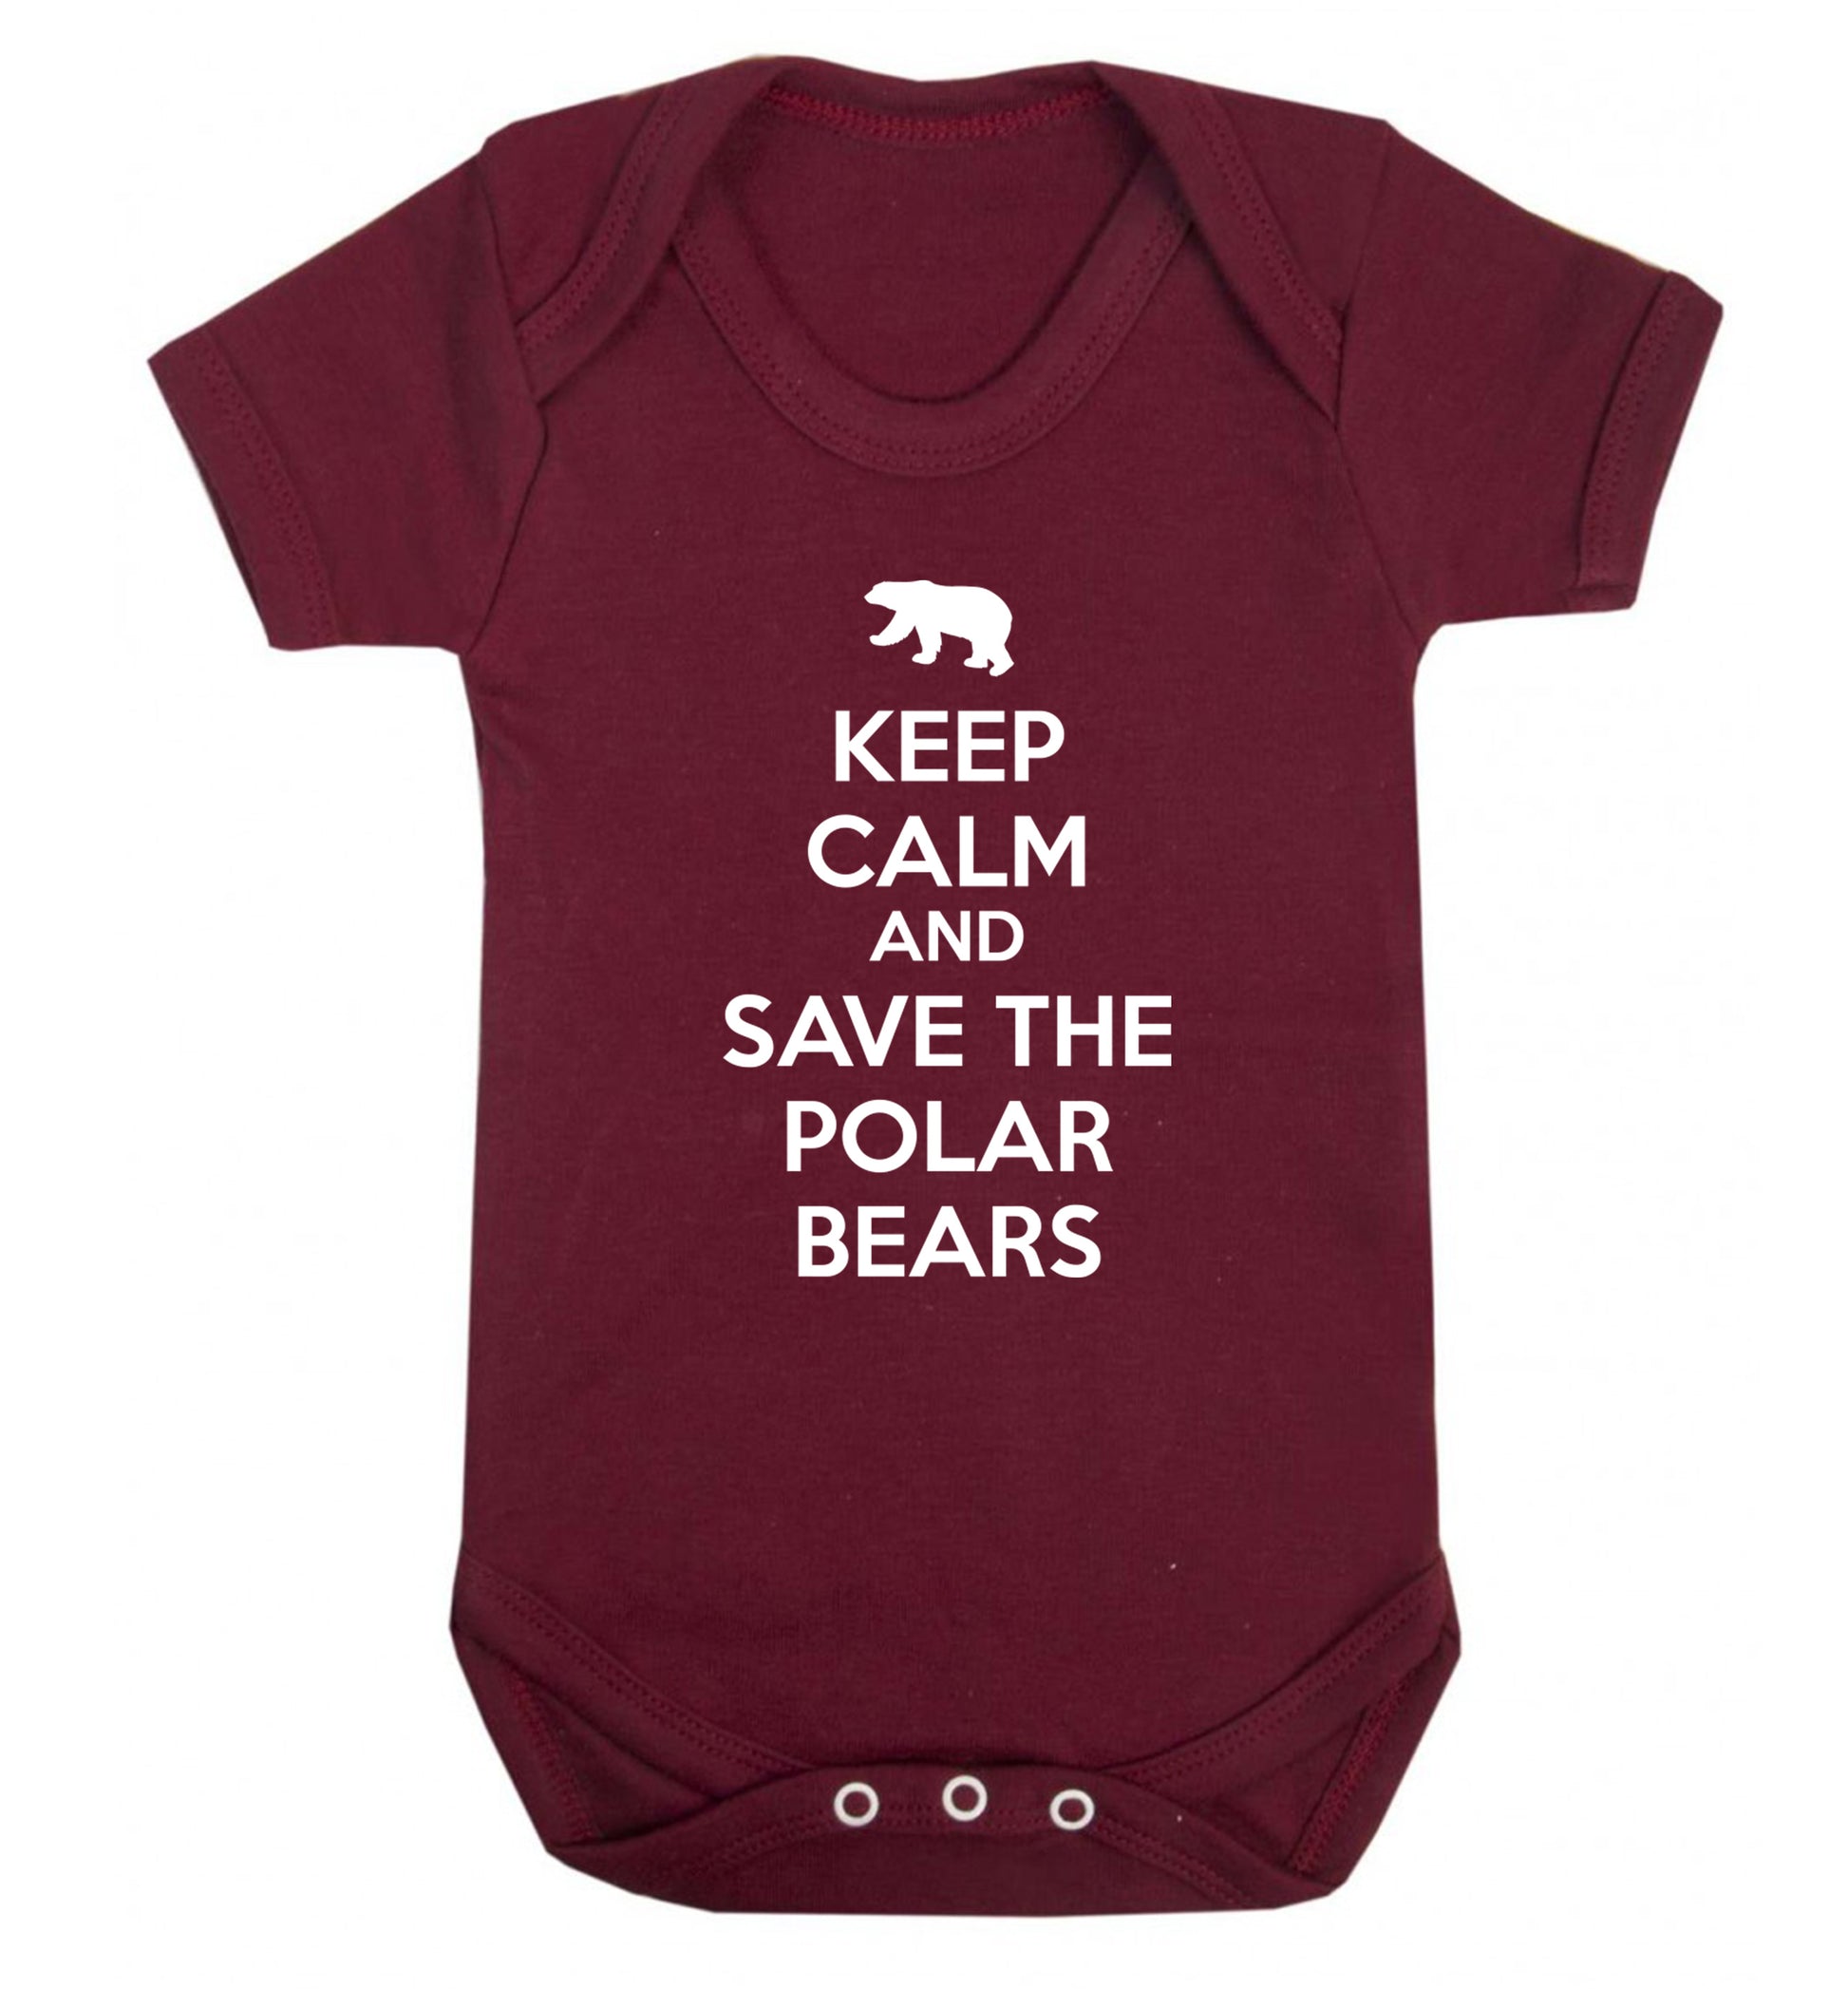 Keep calm and save the polar bears Baby Vest maroon 18-24 months